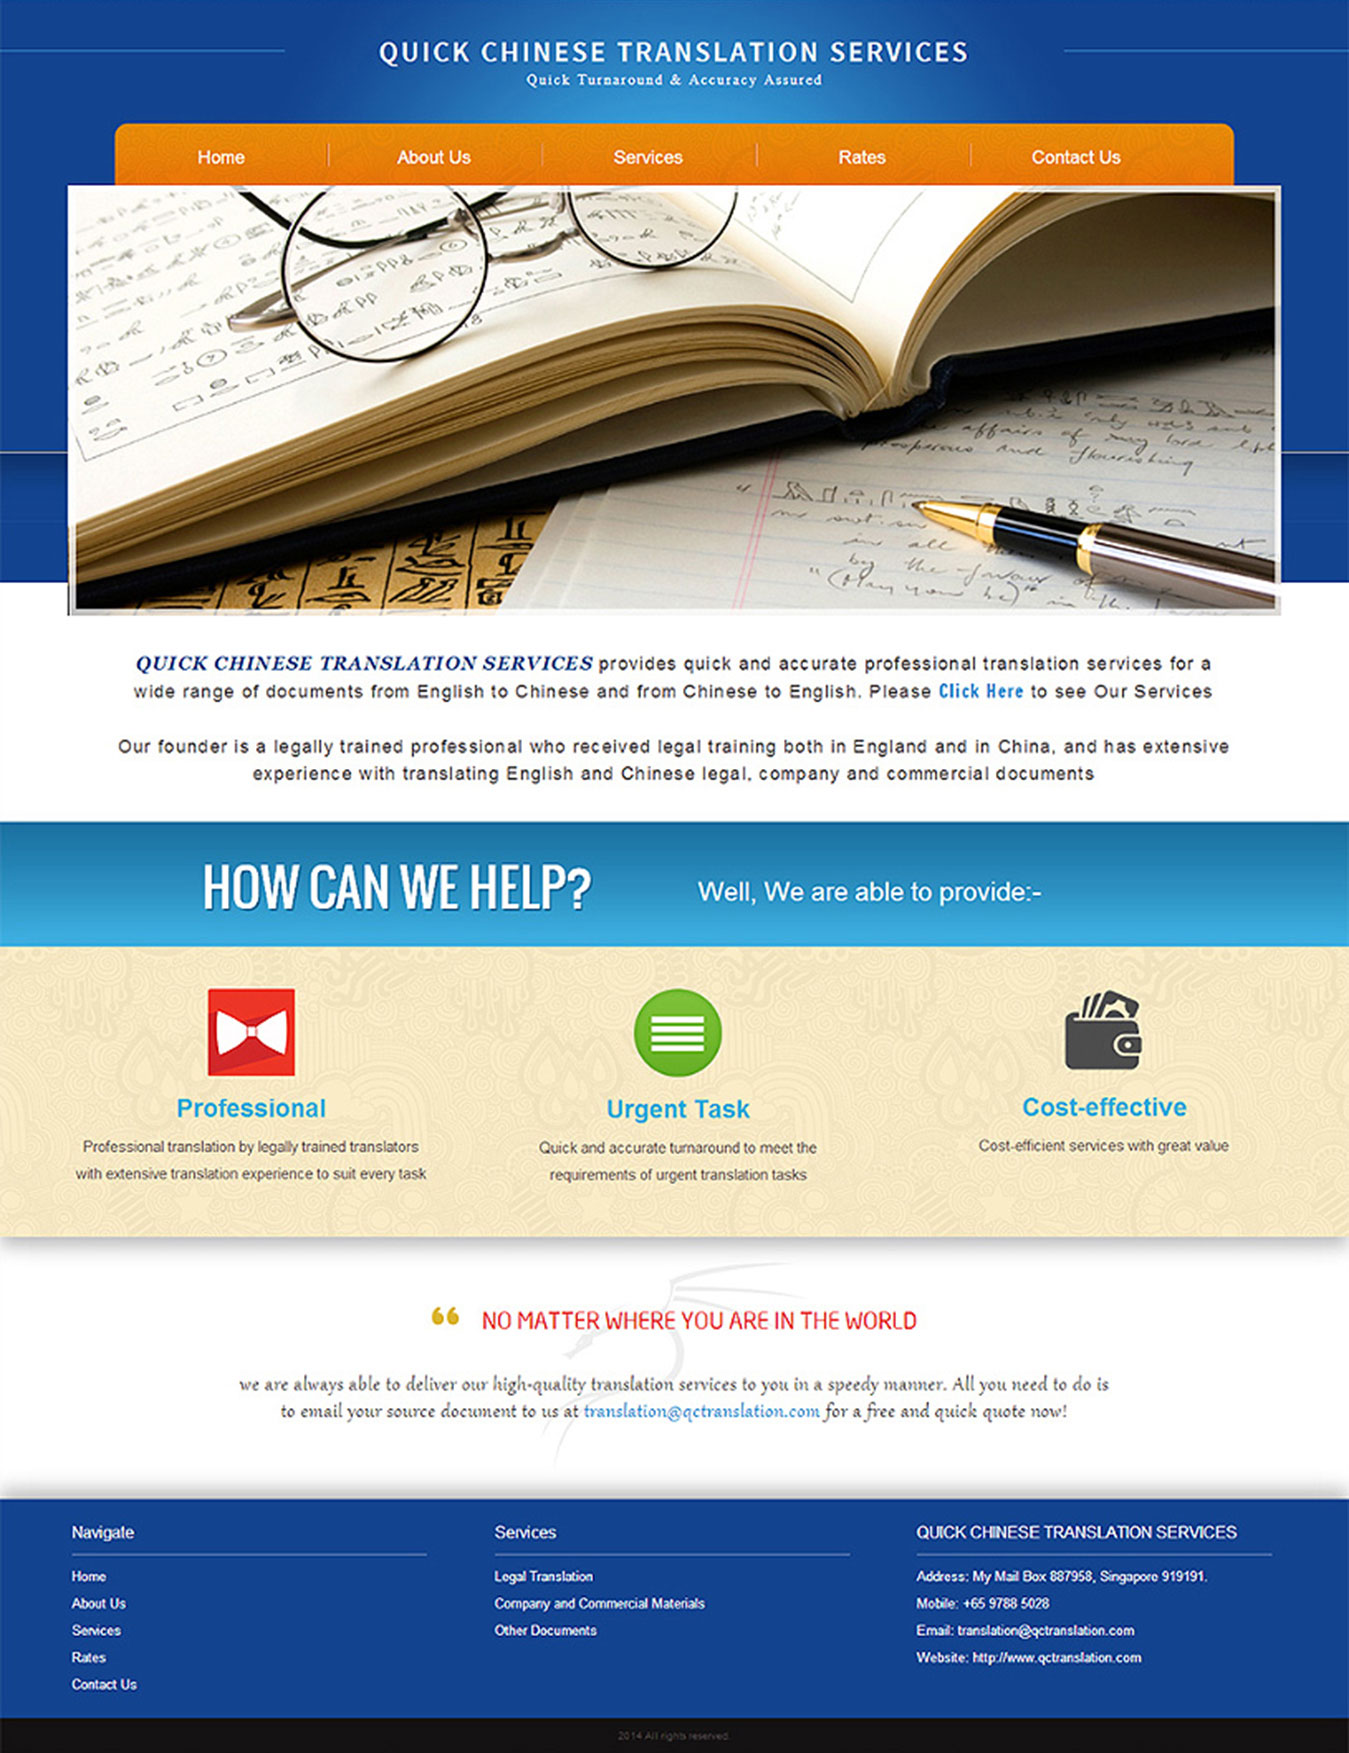 Static Website Design and Development for Translation Services Company in Singapore